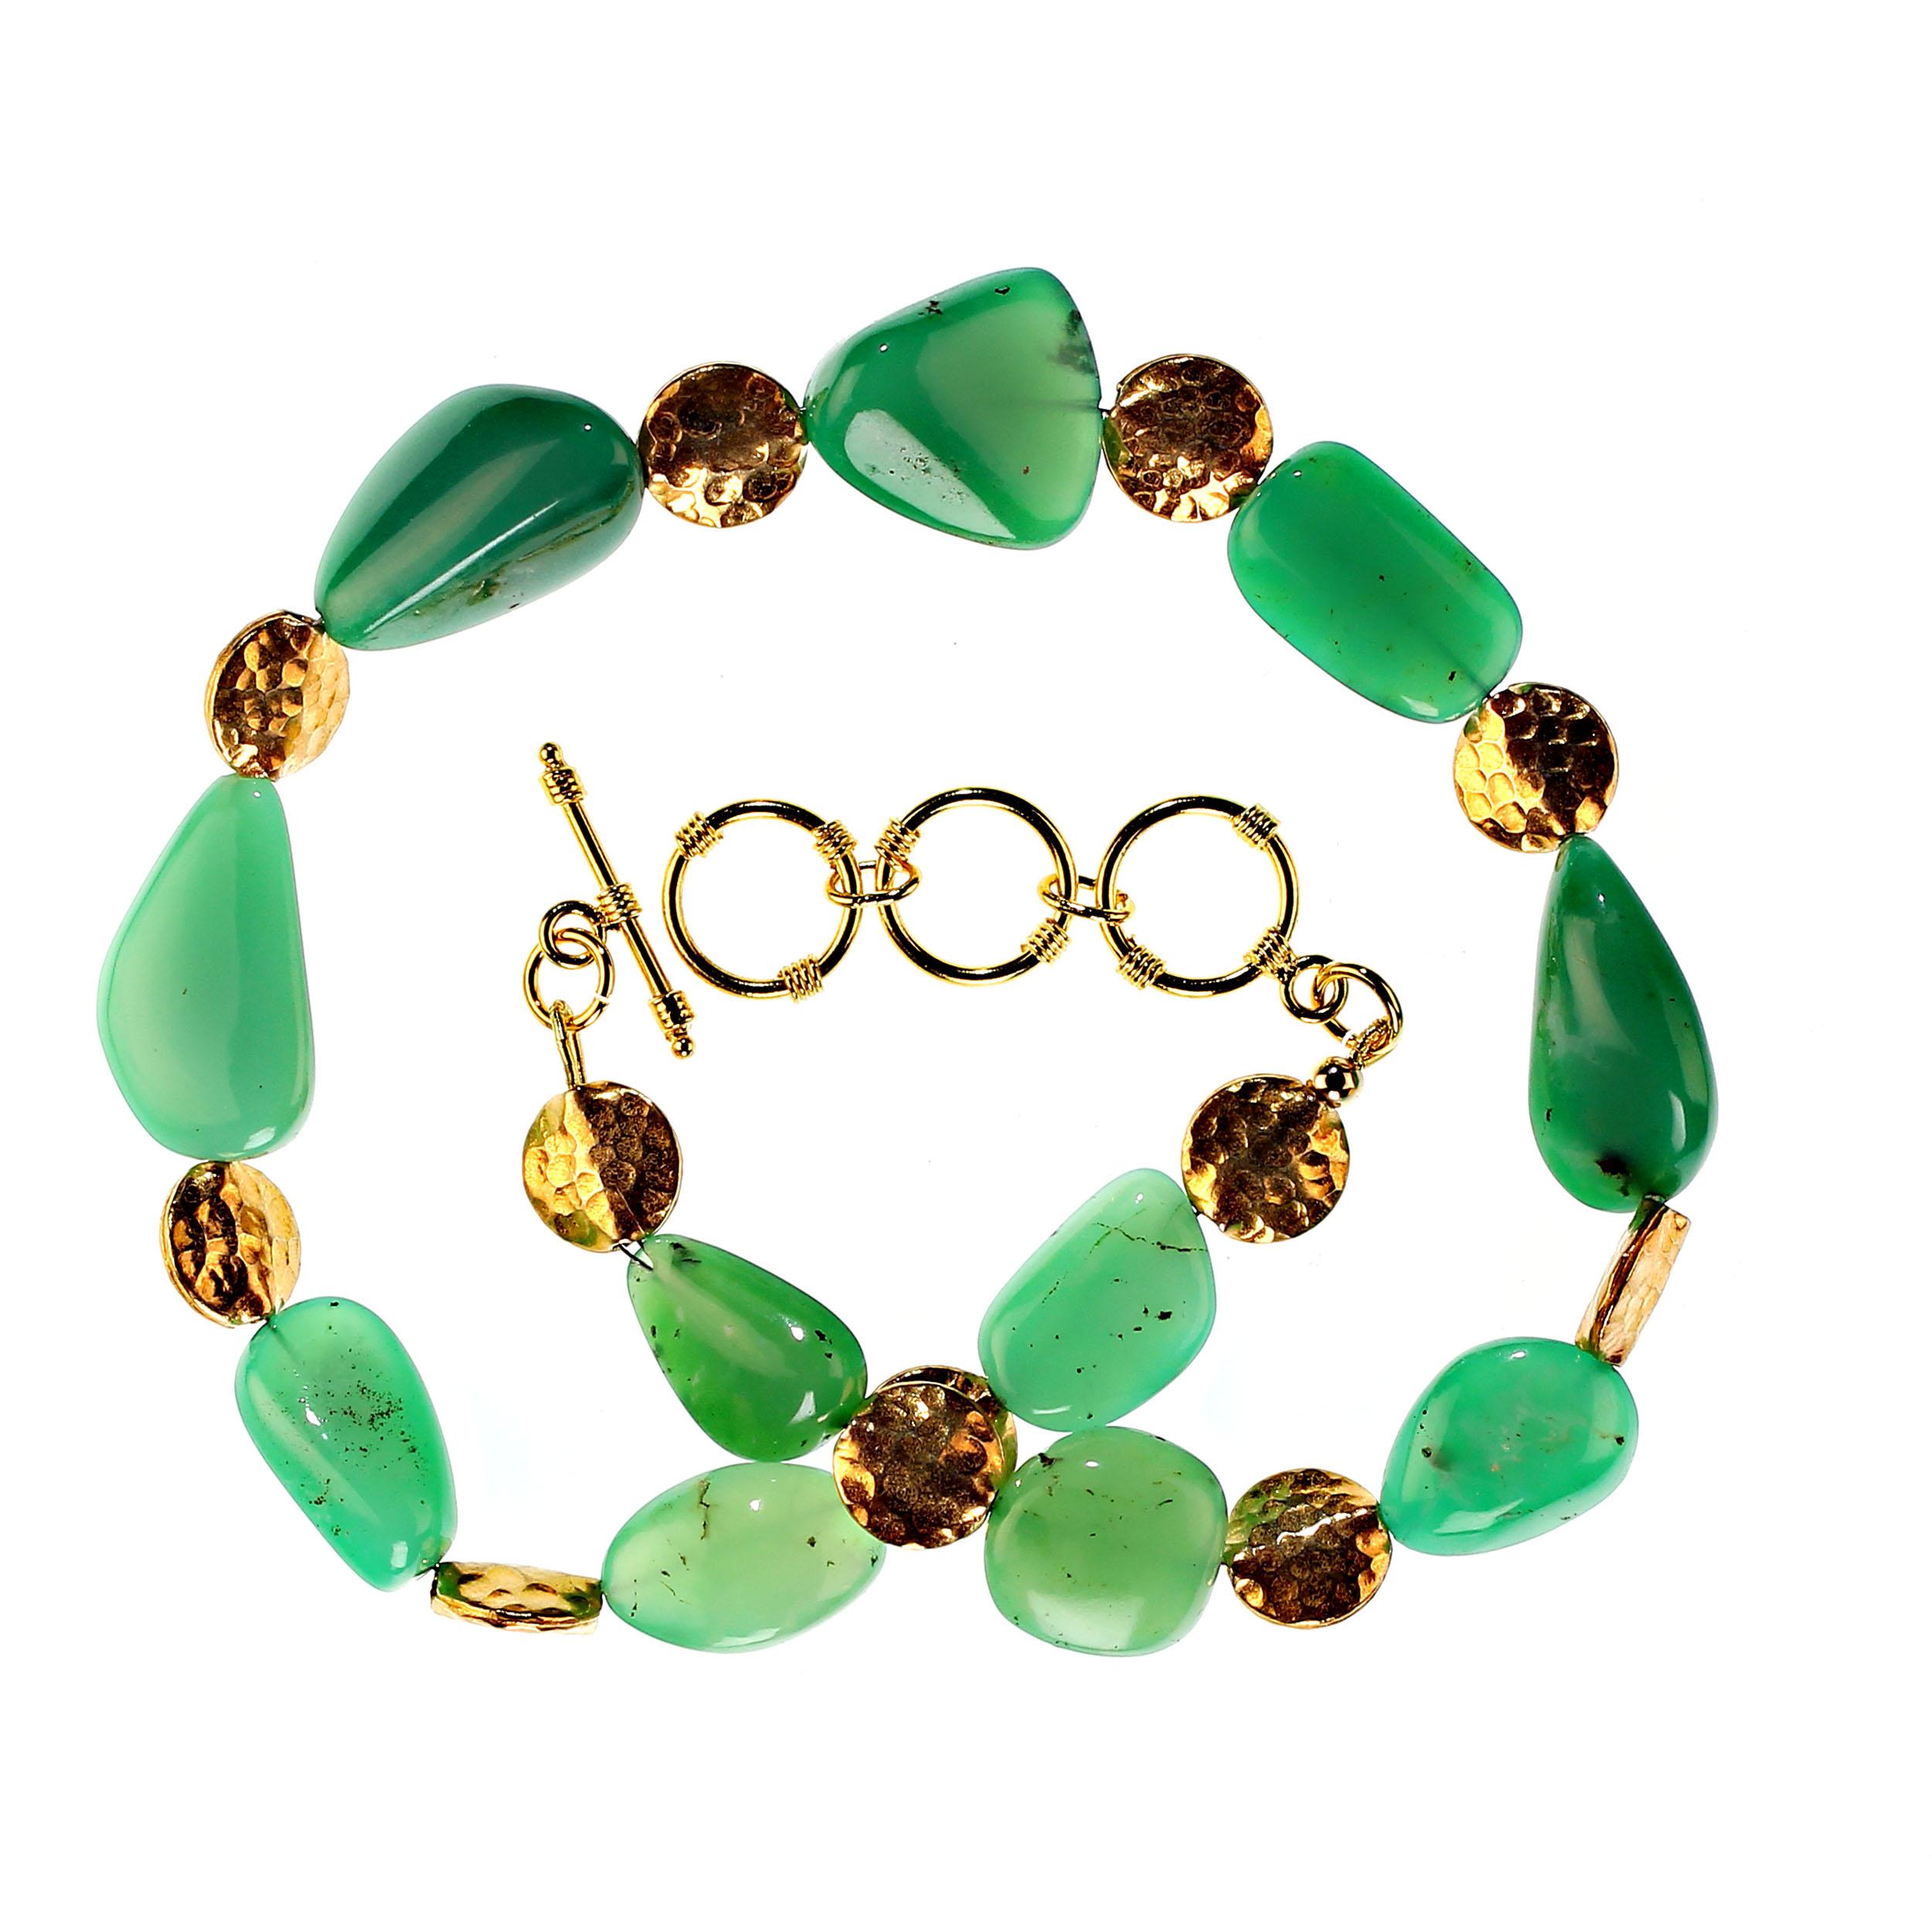 Artist AJD 18 Inch Magnificent Chrysoprase Nugget Necklace with goldy accents For Sale